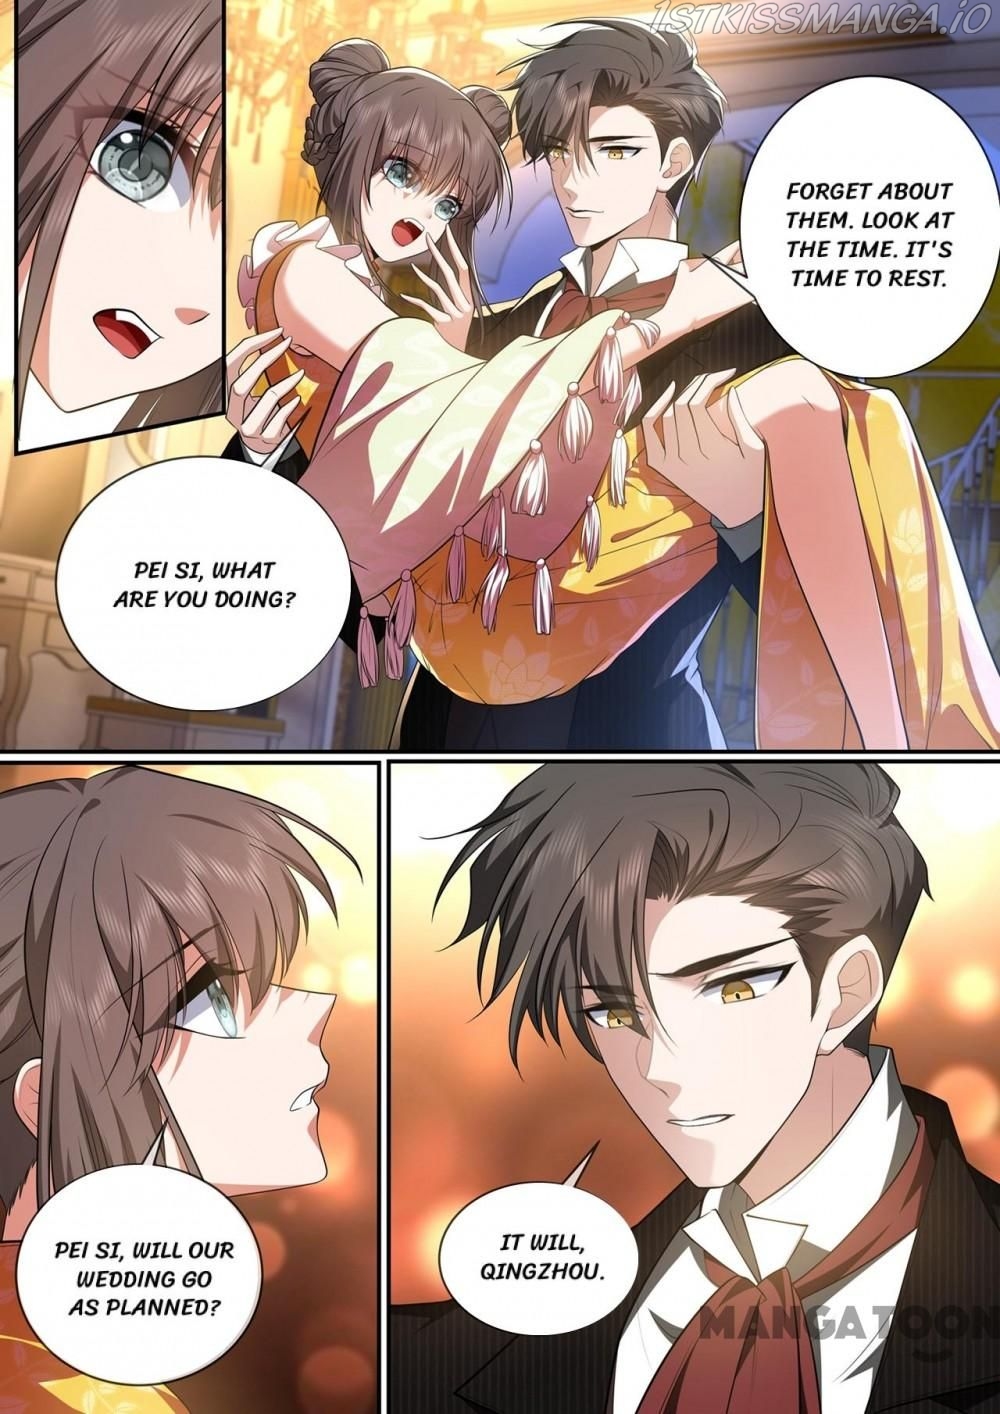 The Epic Revenge ( Marshal Your Wife Run Away ) Chapter 433 - Page 3